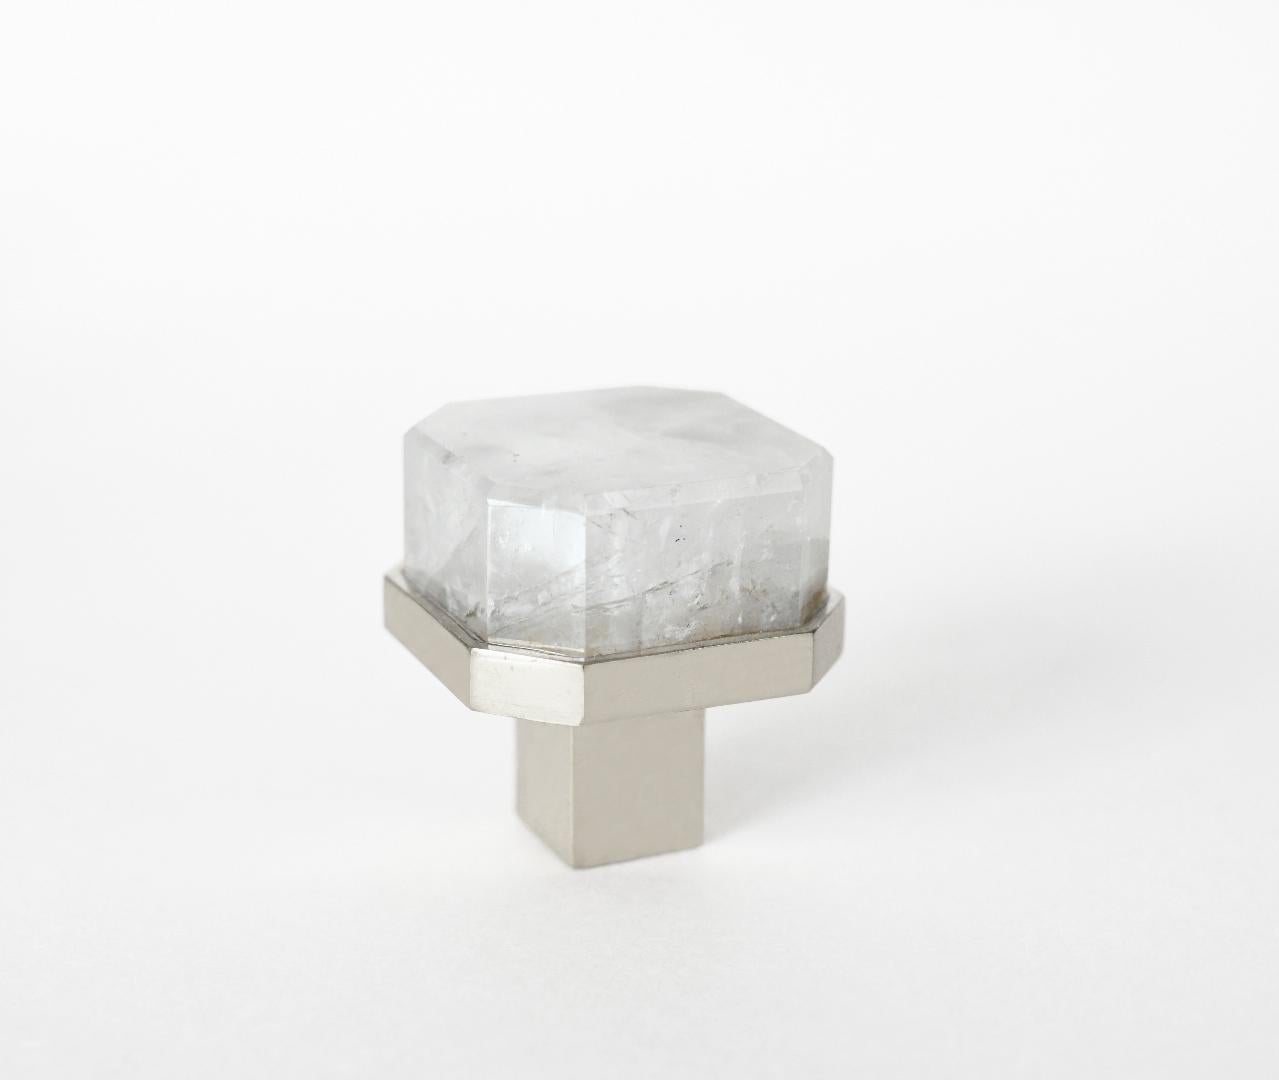 Octagon form rock crystal quartz knob with nickel plating base. Created by Phoenix Gallery, NYC.